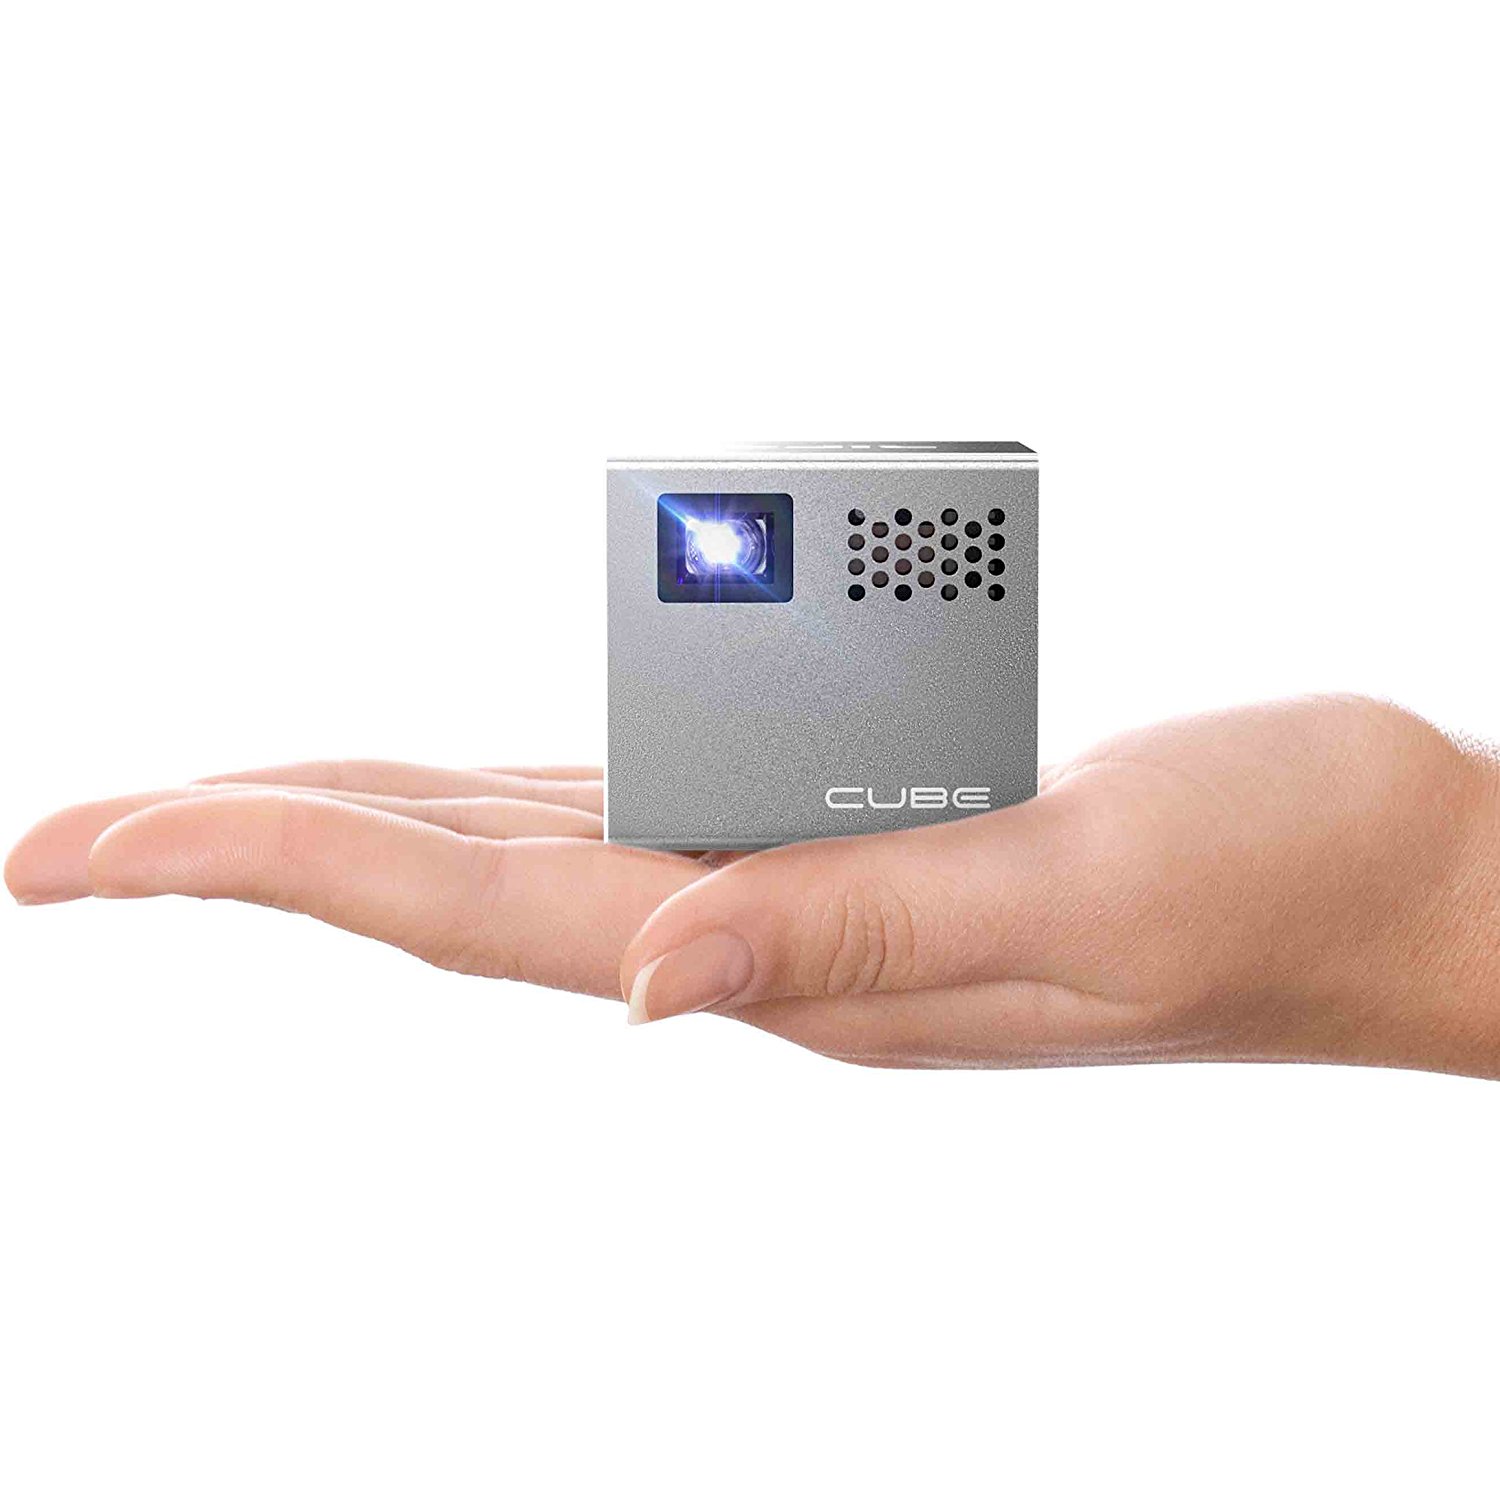 RIF6 CUBE Pico Projector with 120 Inch Display - 2 Inch Mobile Portable Mini Projector 20,000 Hour LED Compatible with HDMI Devices Phones Laptops Tablets and Gameing Consoles - Includes Mini Tripod